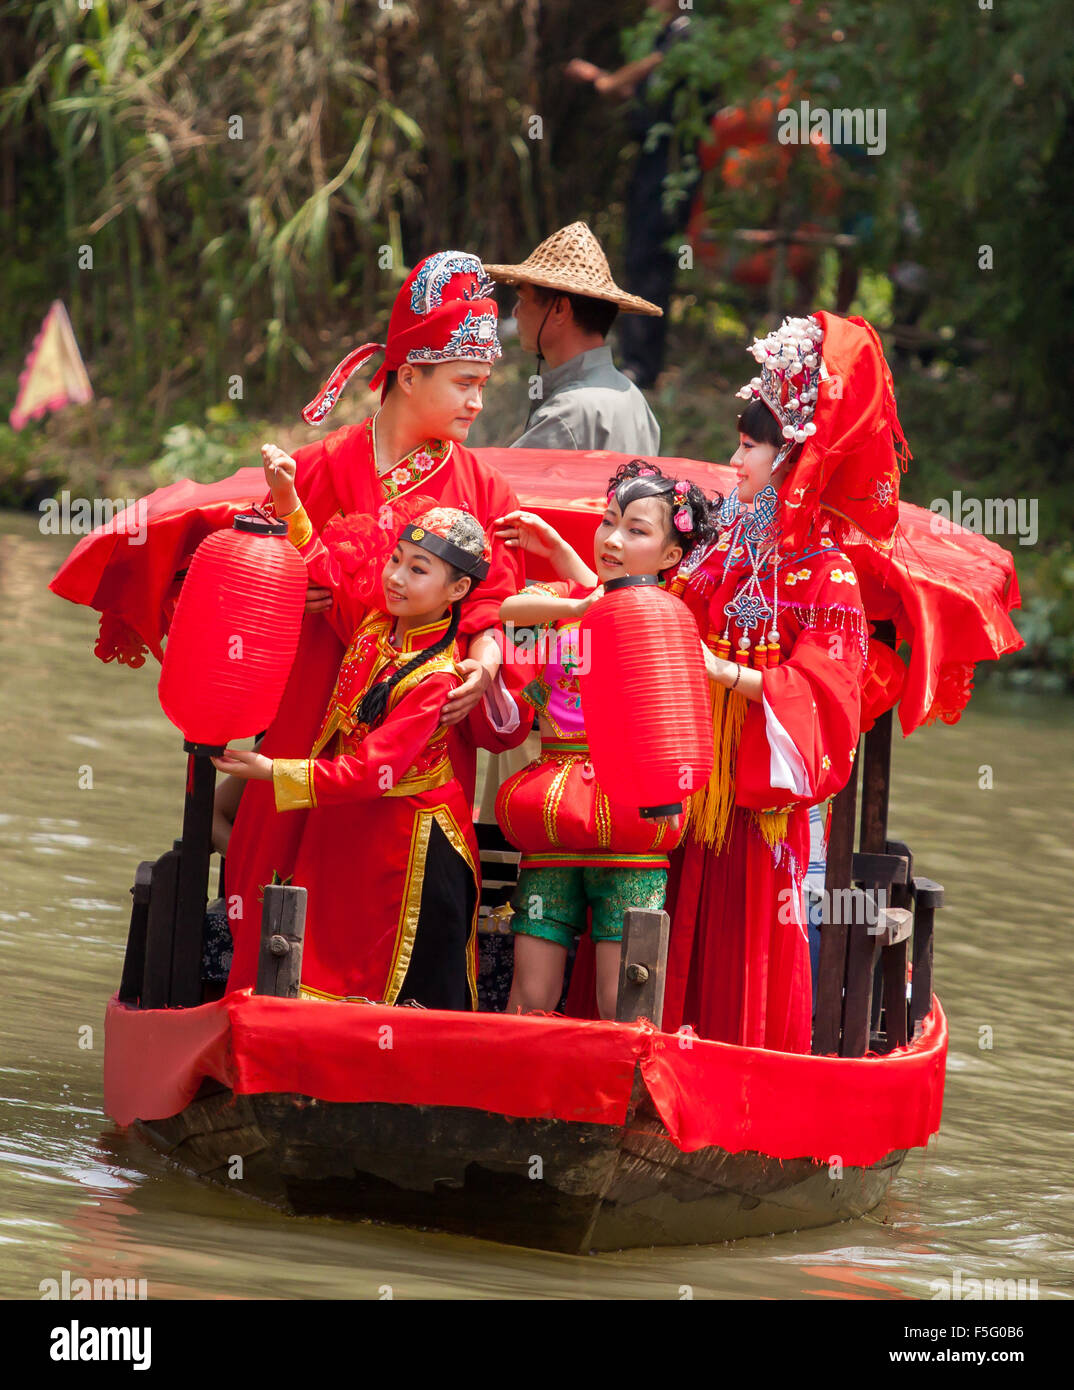 Chinese family in traditional red clothes during Dragon Boat Festival in Xixi Wetland Park in Hangzhou, China on June 20th 2015. Stock Photo